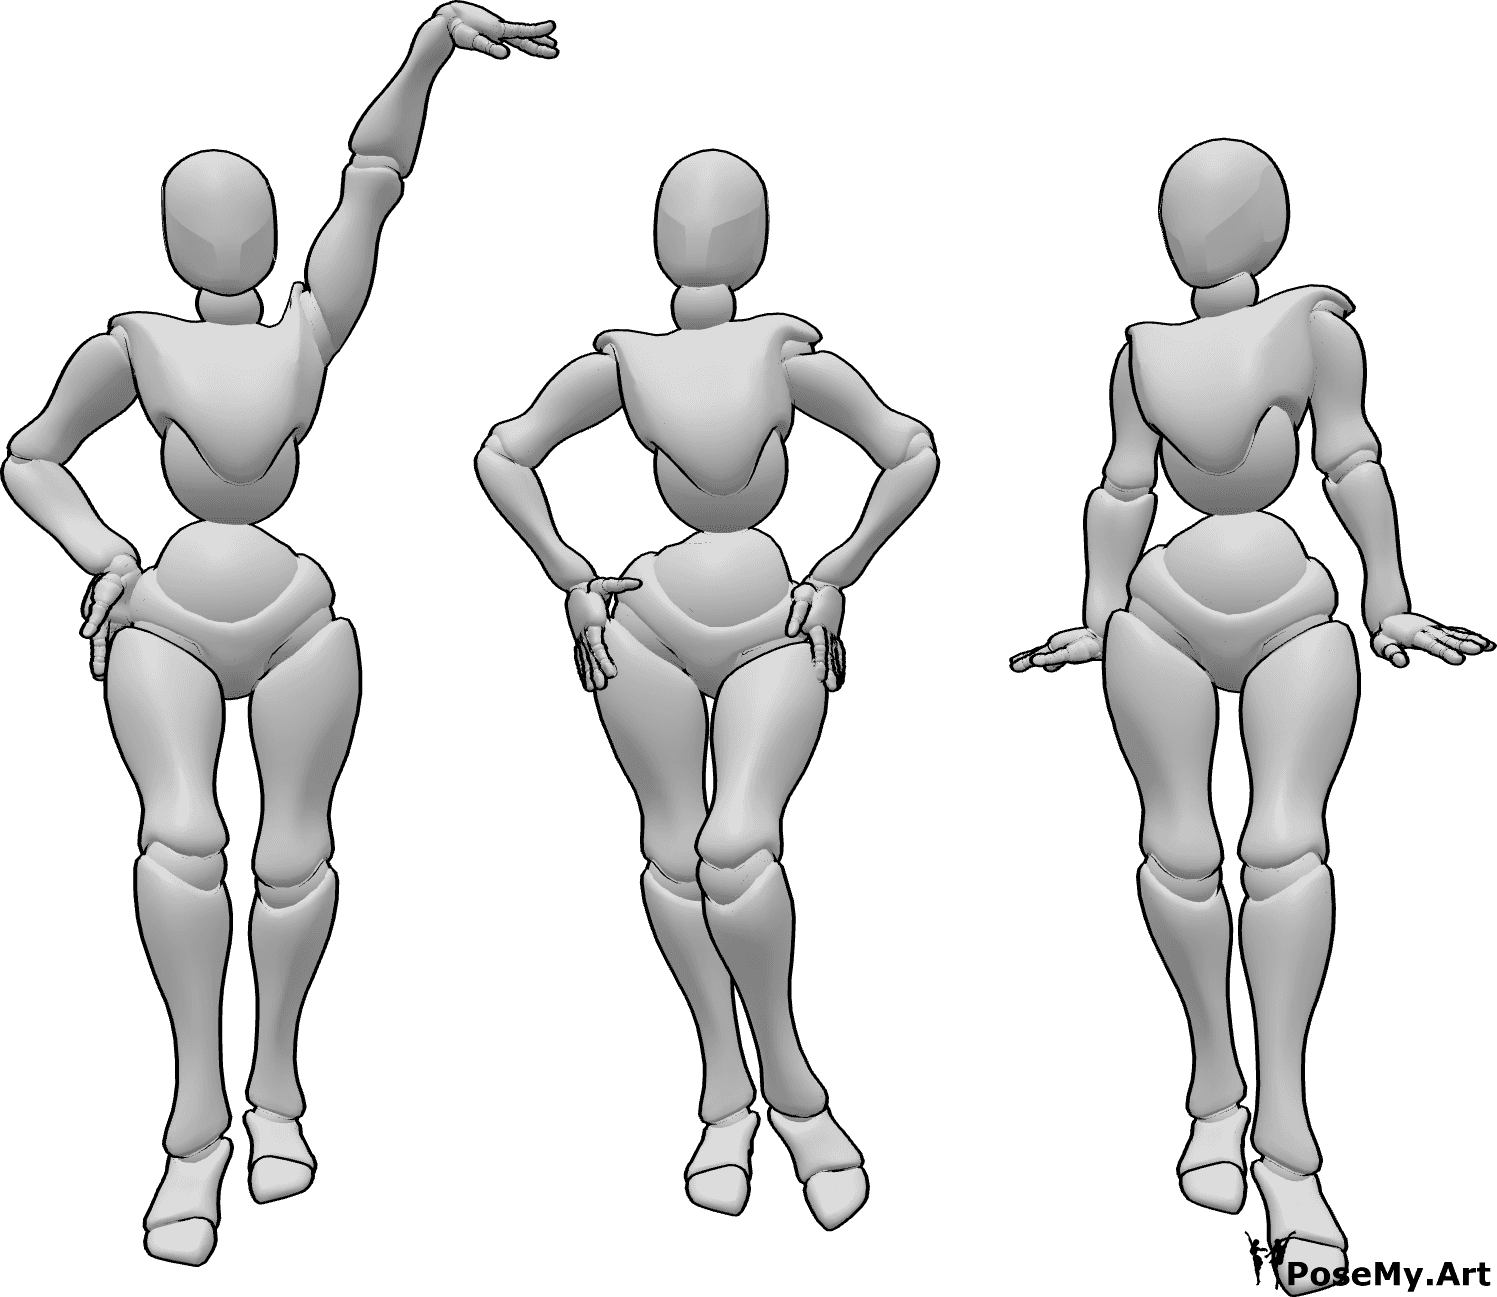 Pose Reference- Three females standing pose - Three females are standing and posing like models